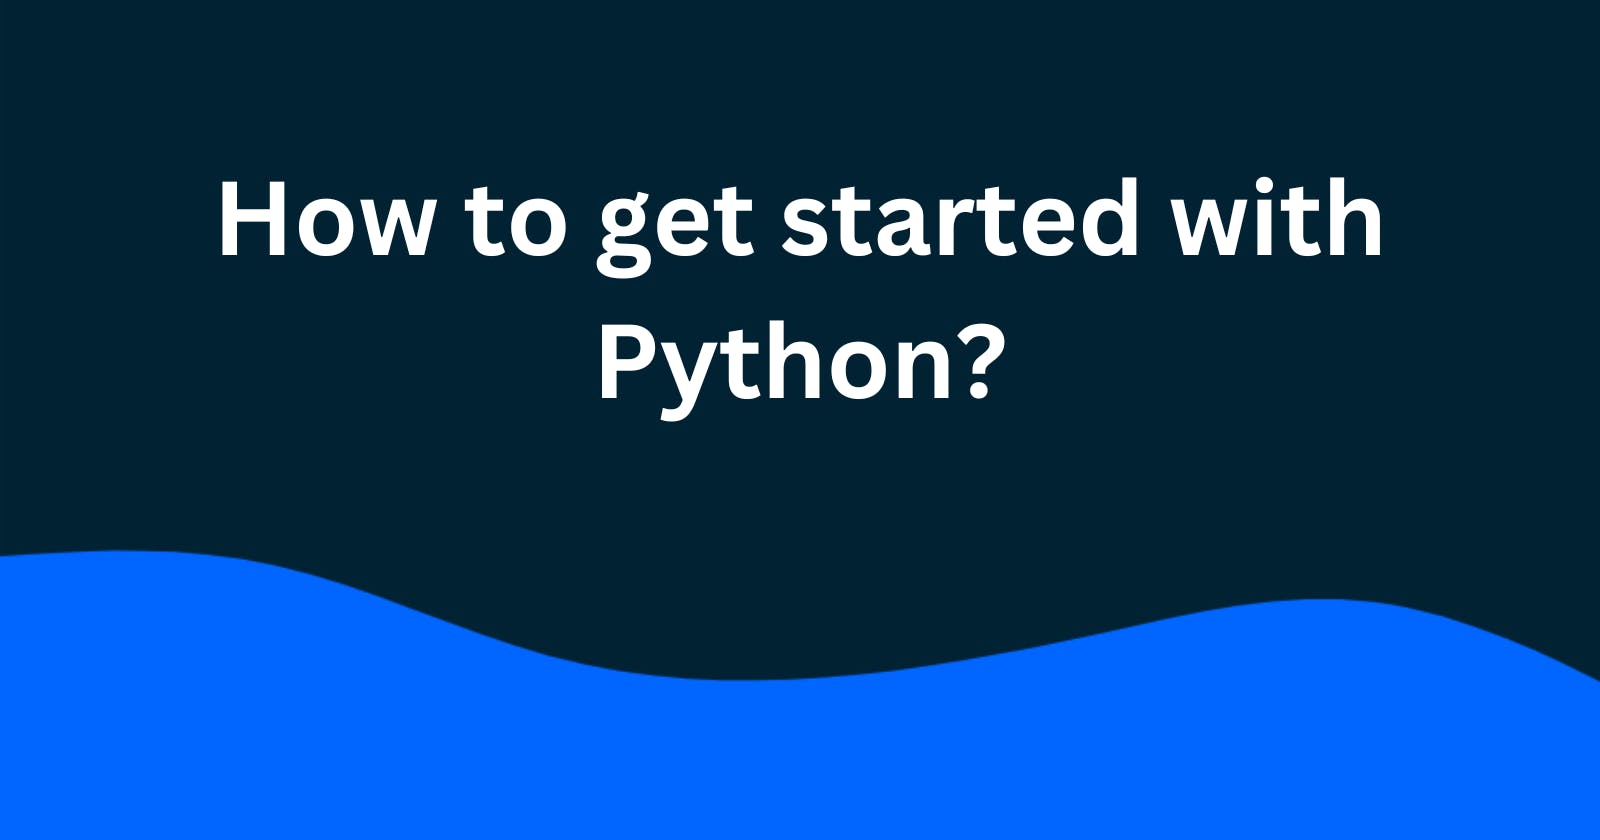 How to get started with Python?